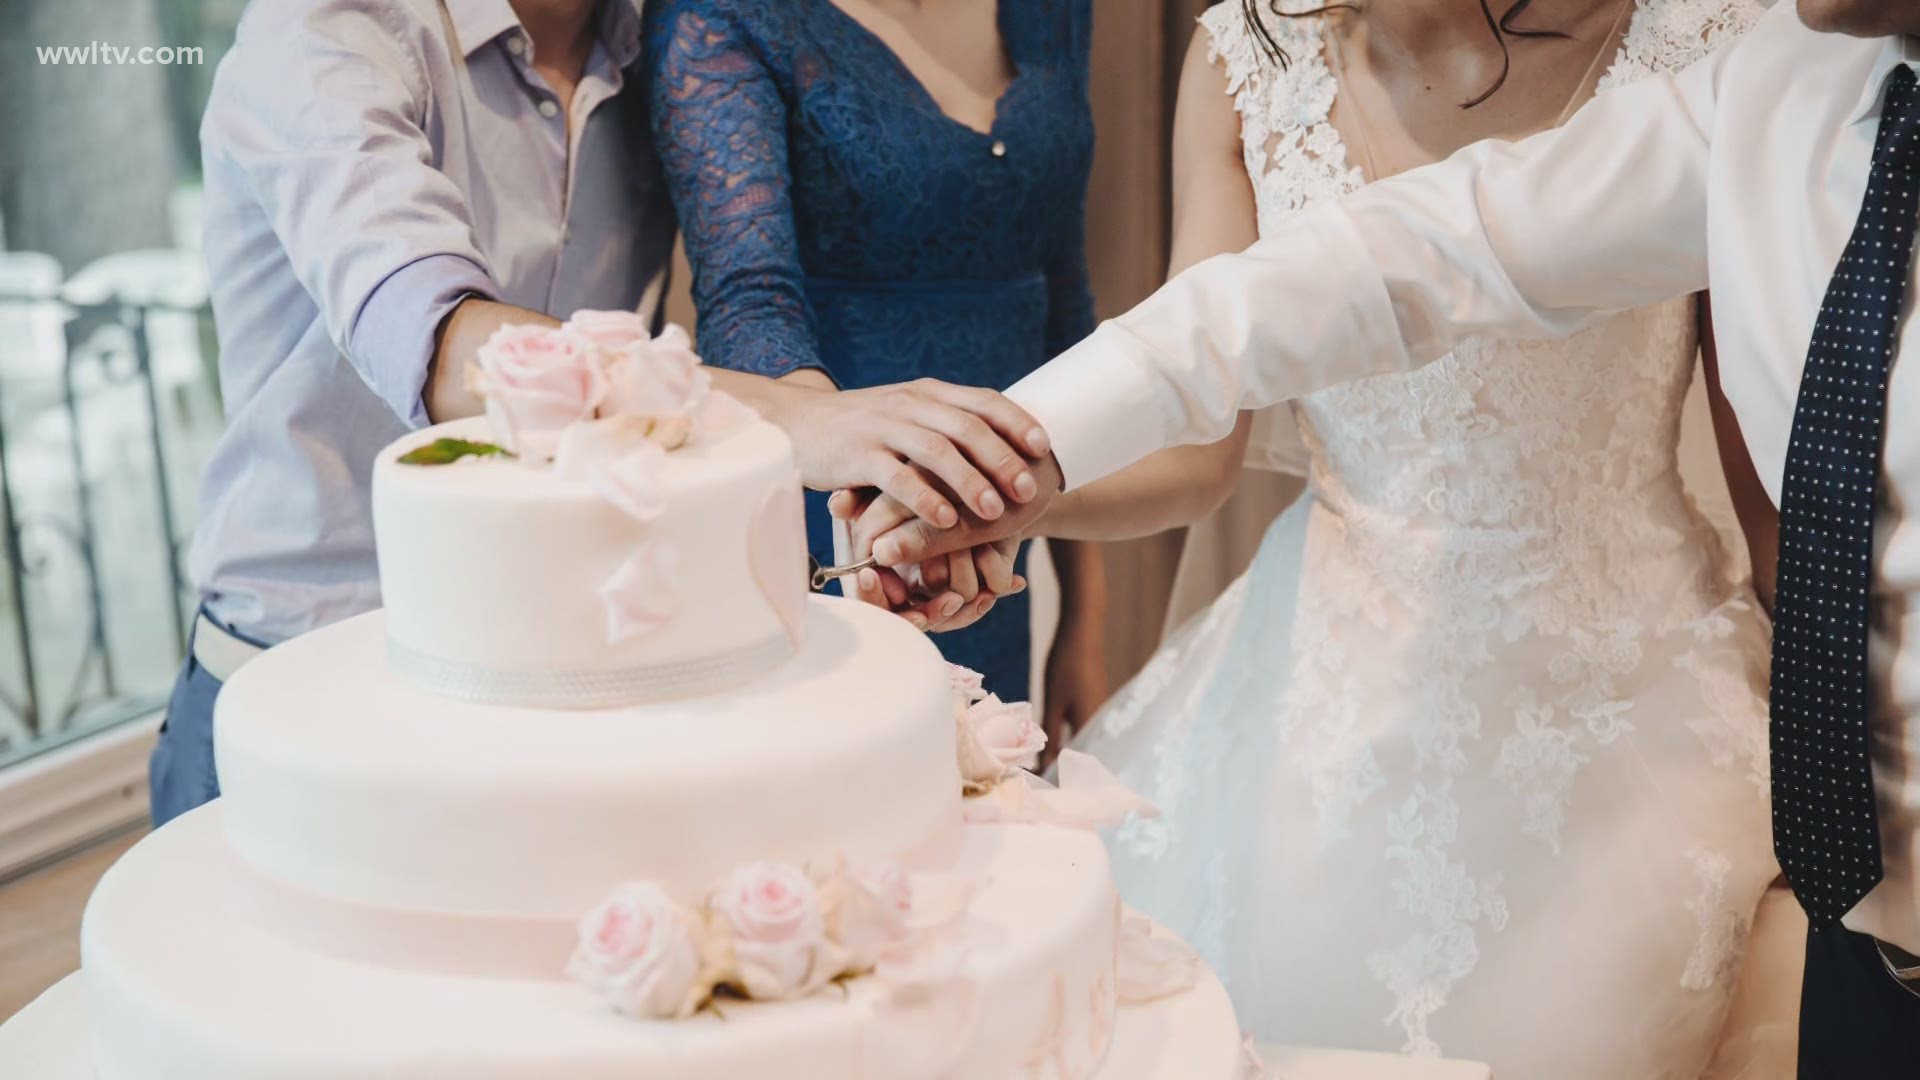 Couples are going ahead with weddings during the pandemic, which raises some new etiquette questions. Melanie Spencer from New Orleans Bride Magazine explains.